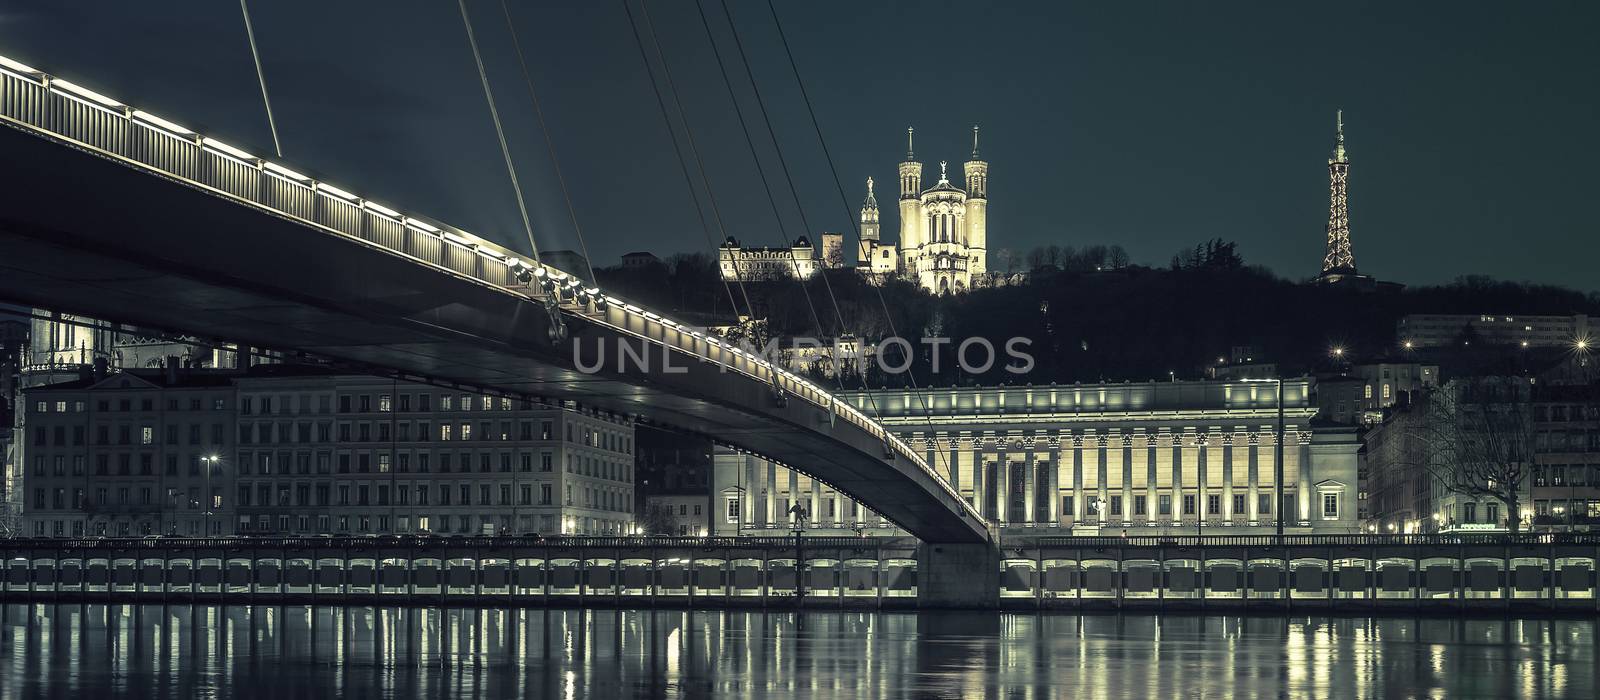 Lyon by night, special photographic processing by vwalakte